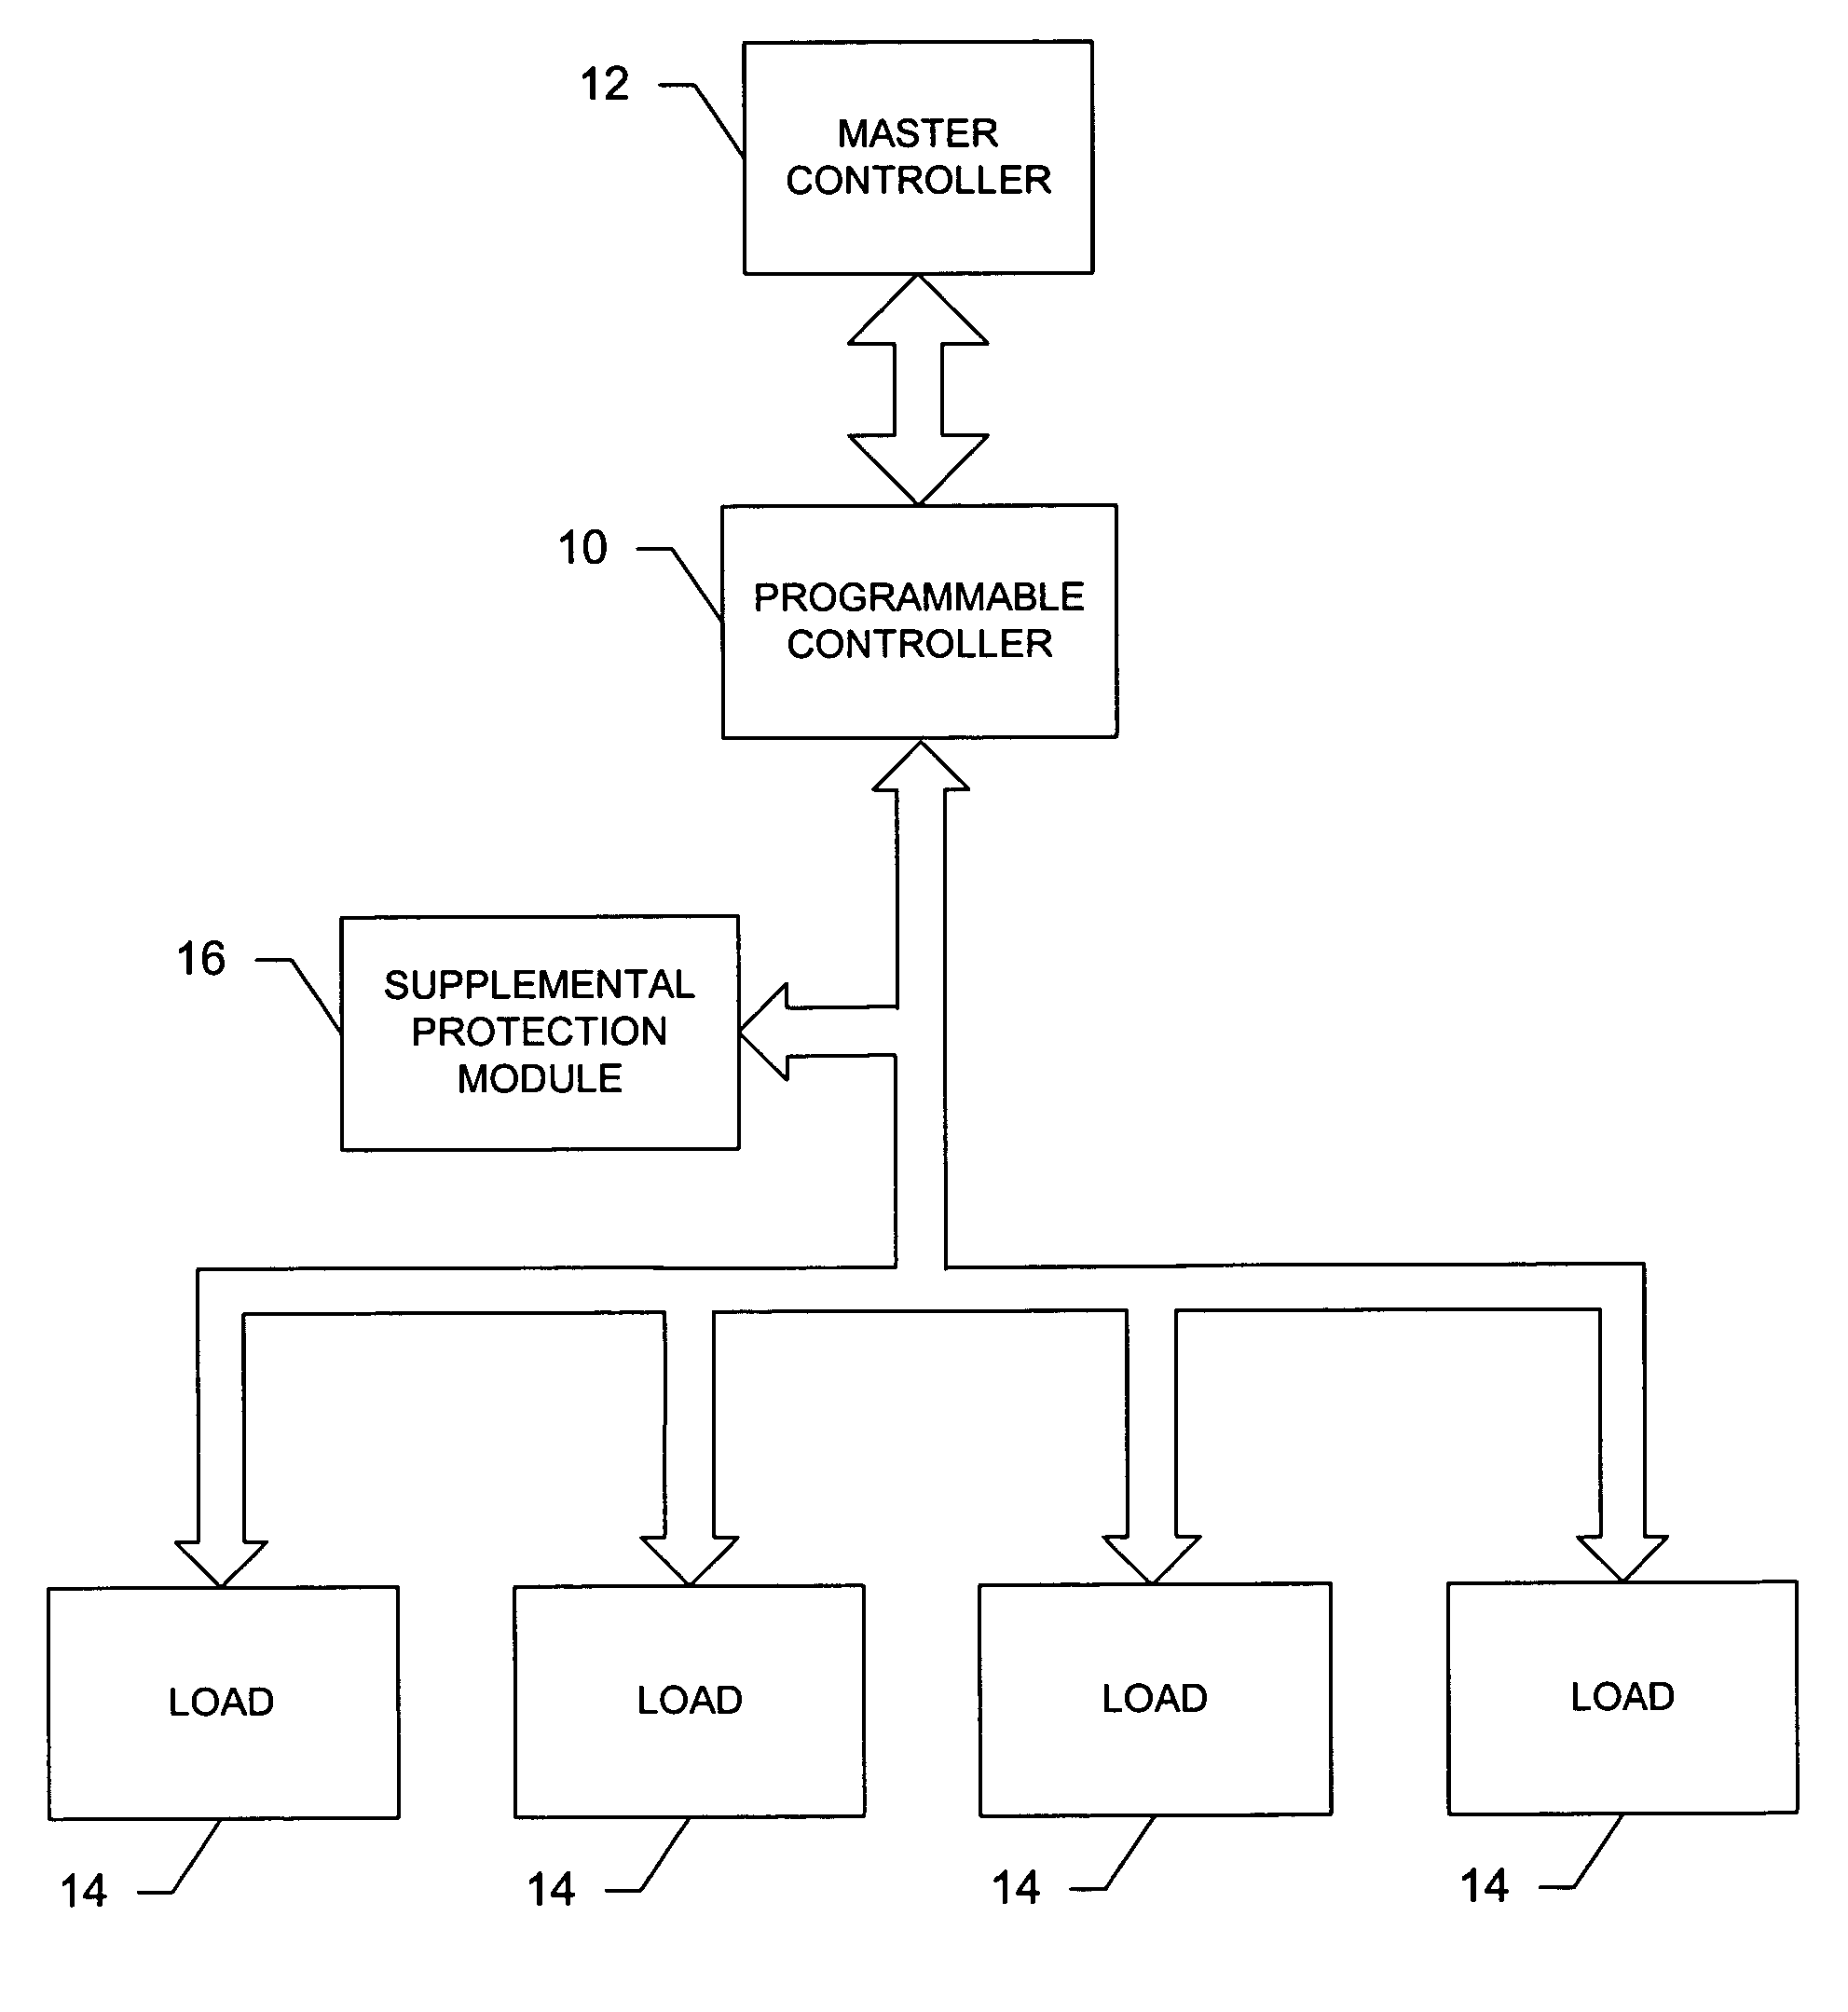 System and method for remotely detecting and locating faults in a power system